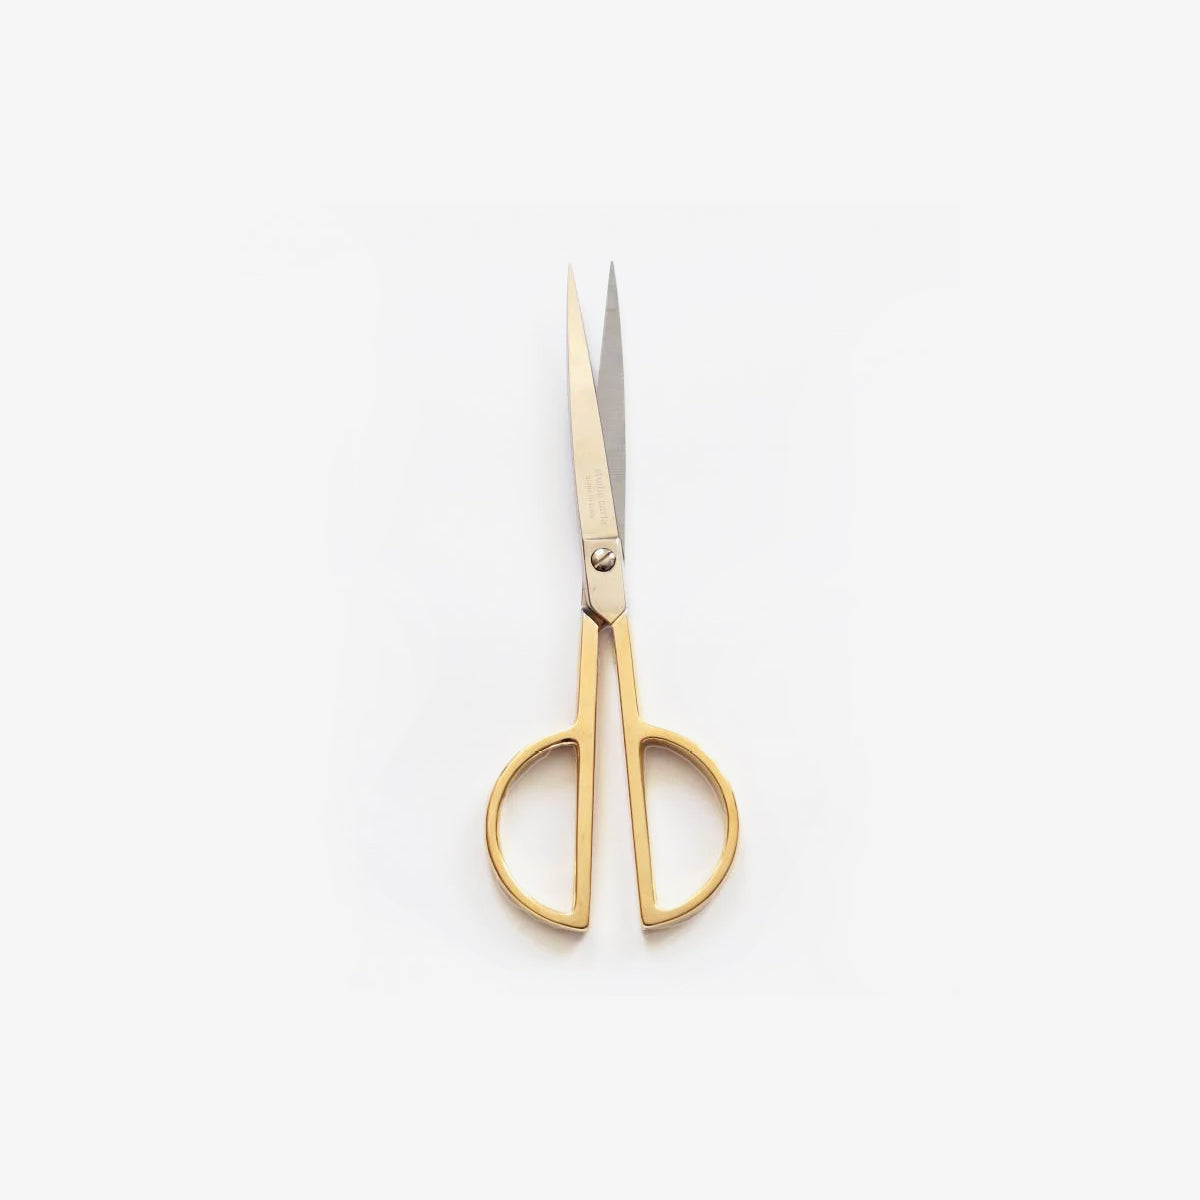 PAPER SCISSORS WITH 24-KARAT-GOLD-PLATED HANDLE